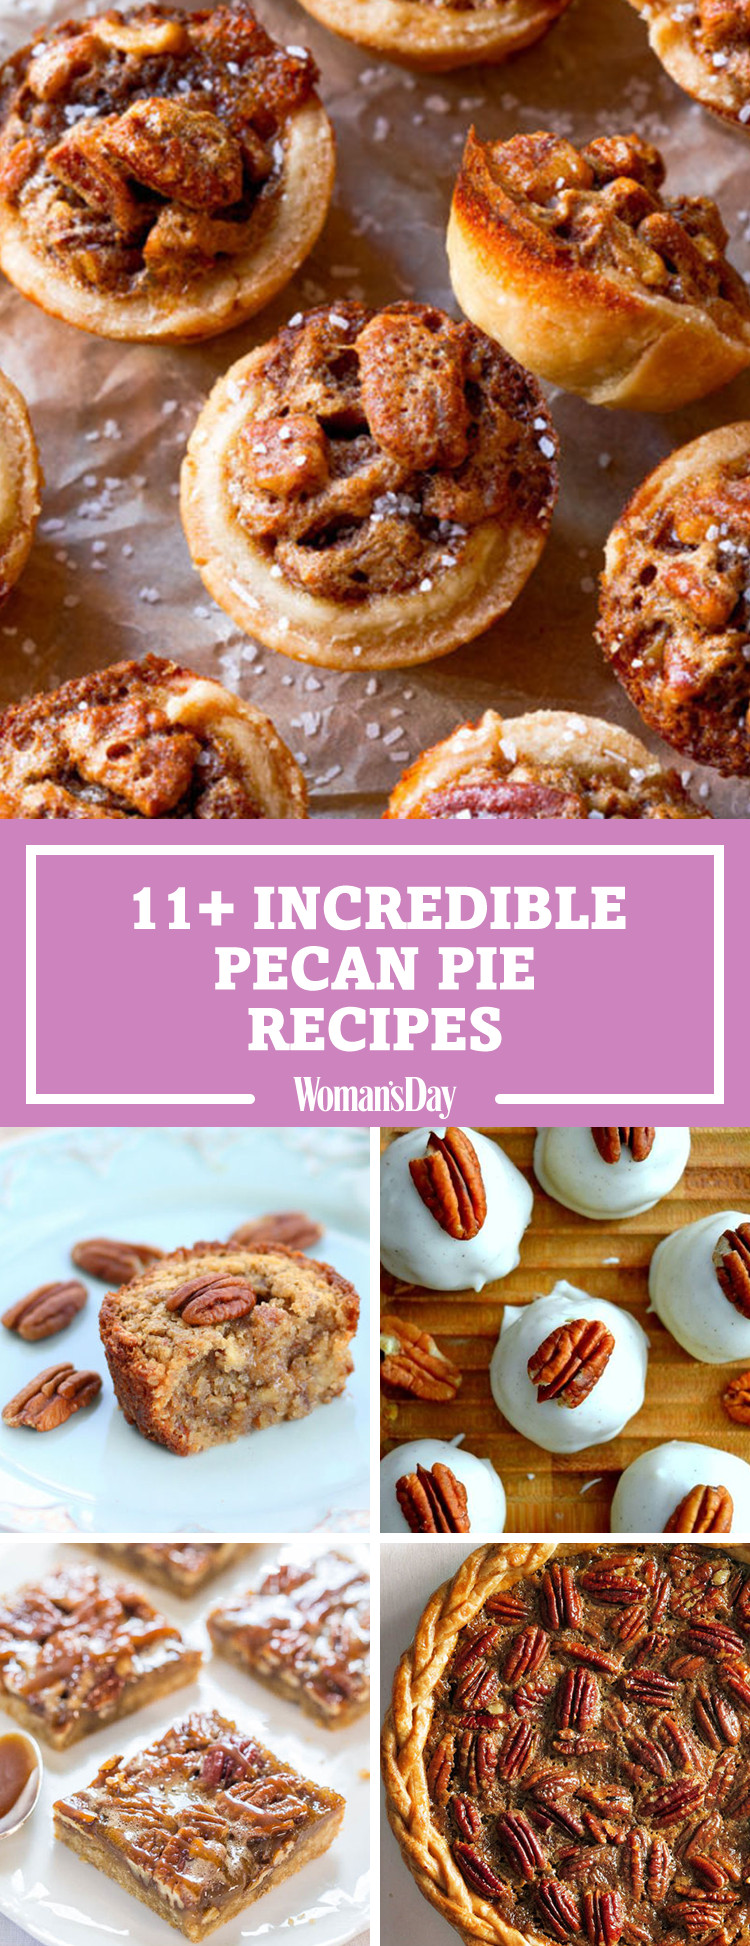 How To Make A Pecan Pie
 14 Easy Pecan Pie Recipes How to Make the Best Homemade